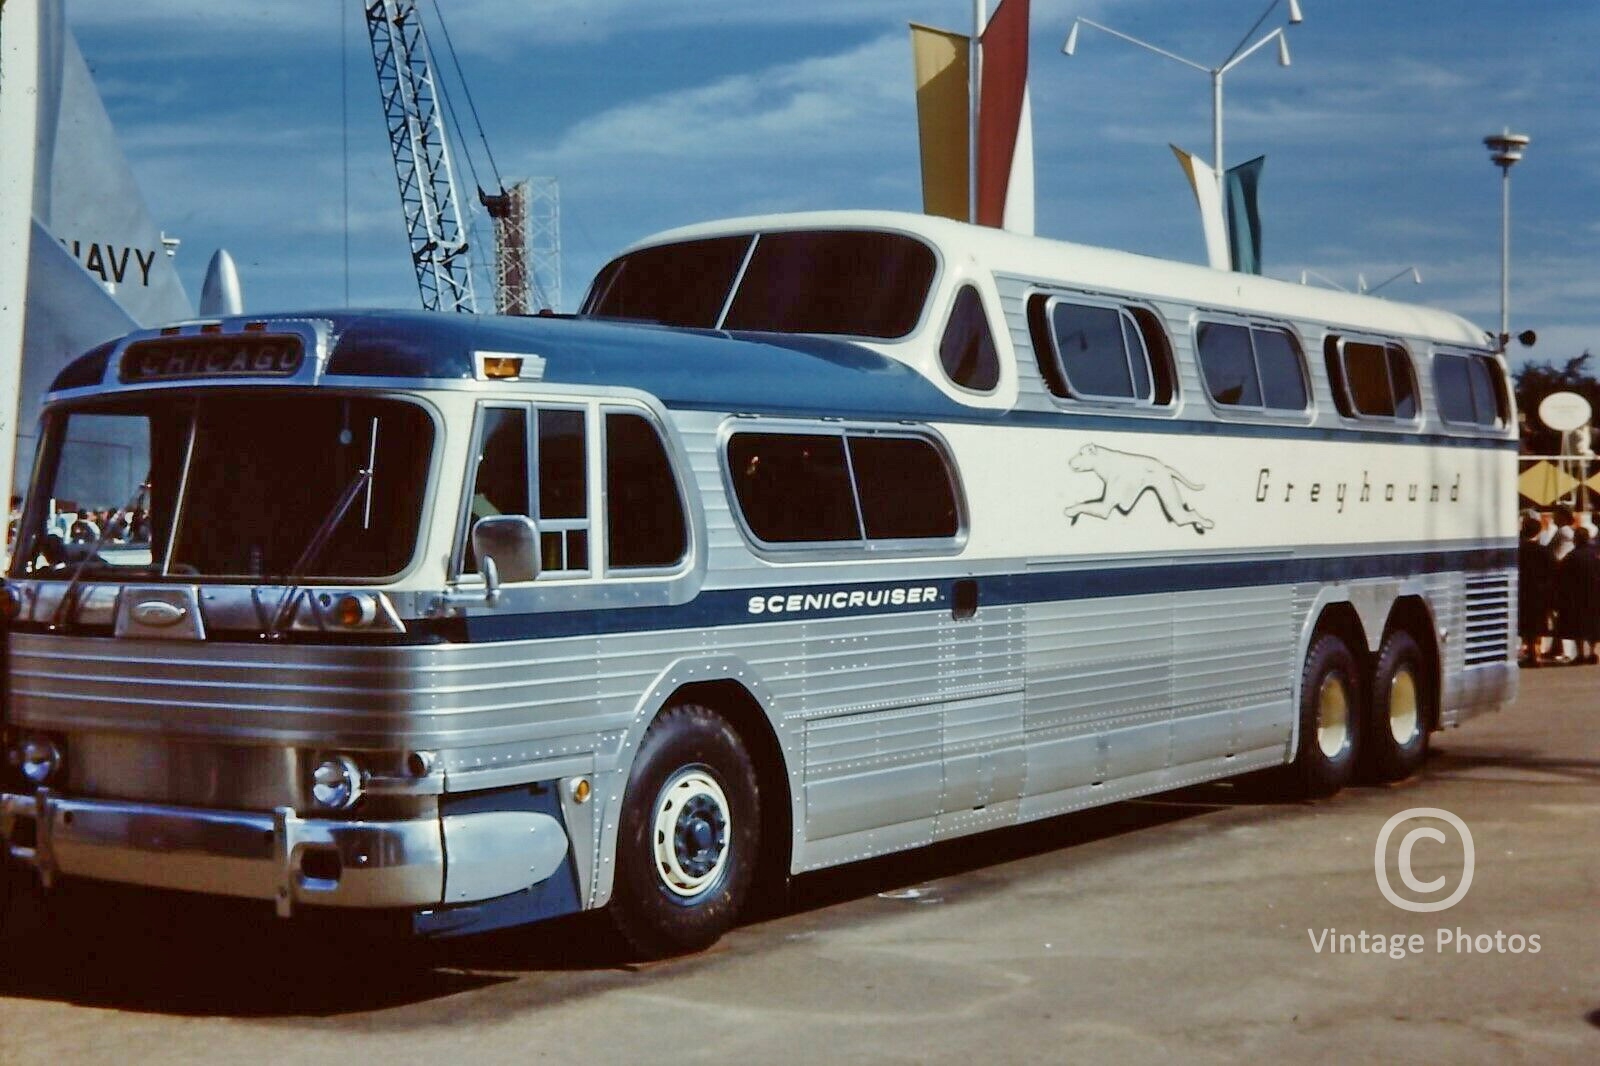 1950s Classic Greyhound Bus - Scenic Cruiser PD-4501 going to Chicago